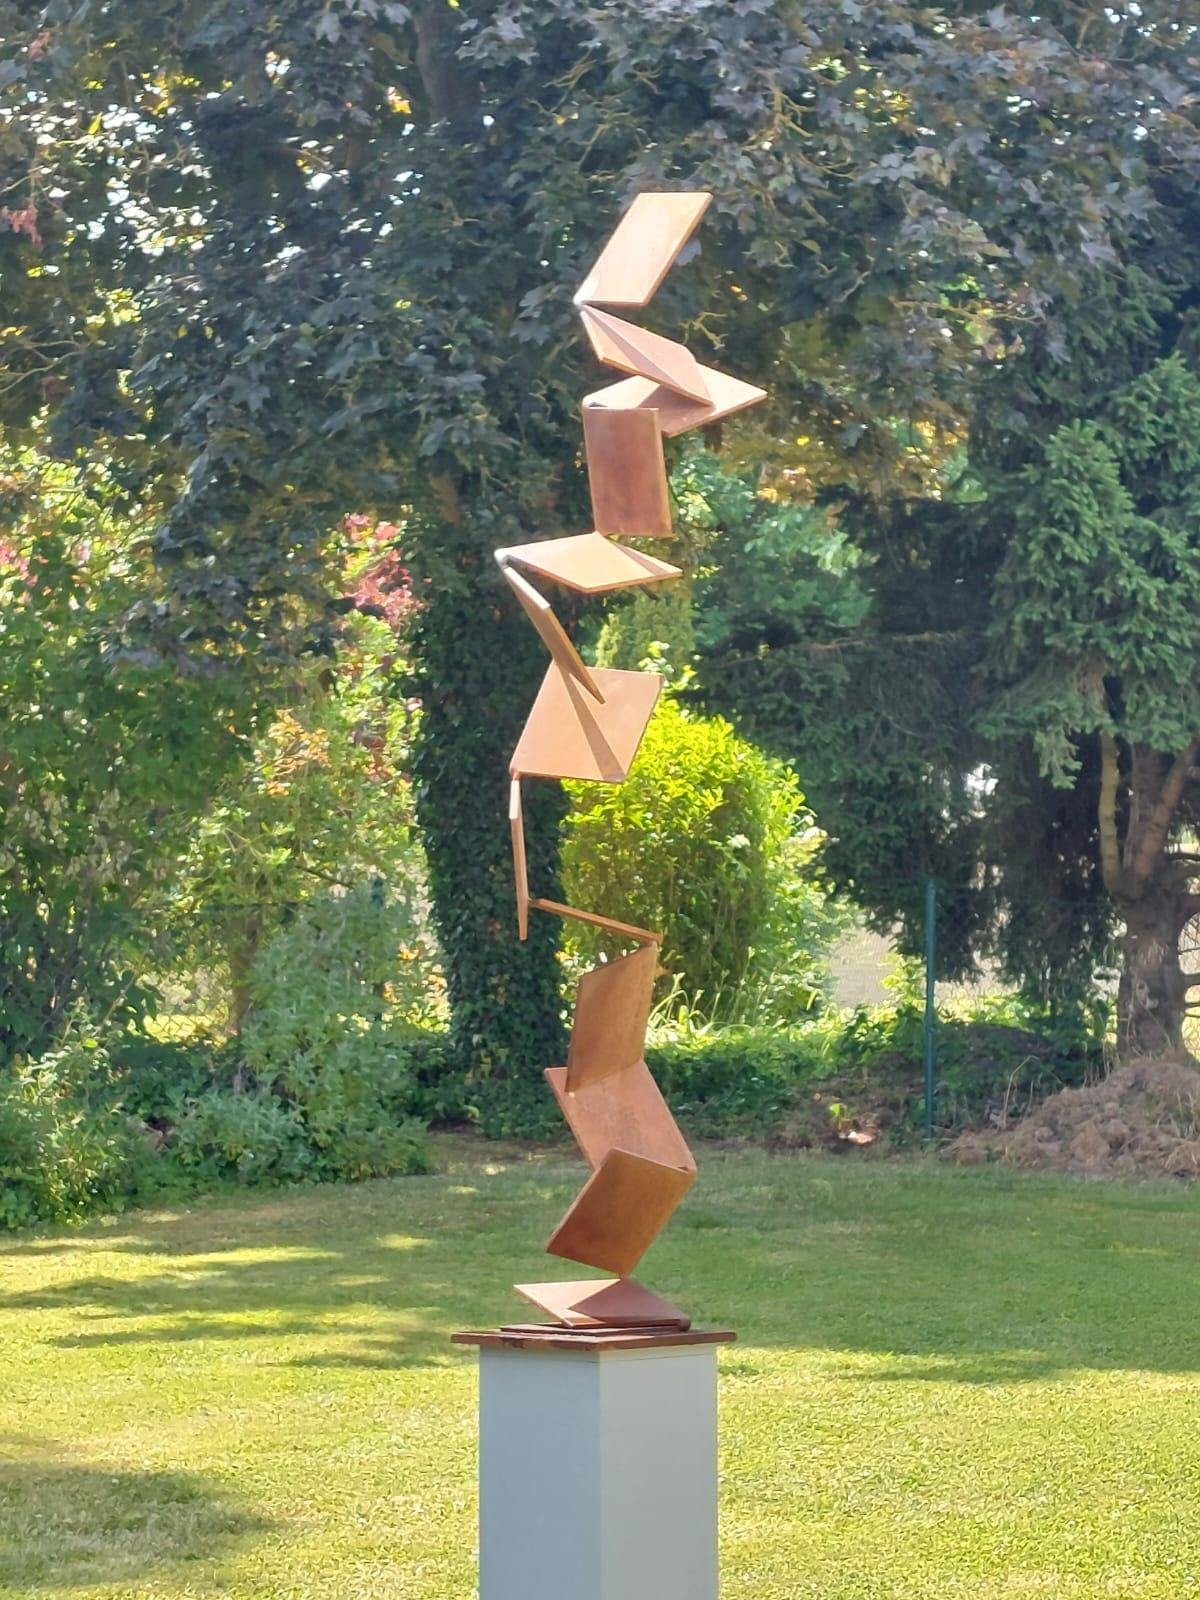 This beautiful large corroded steel  sculpture can be used for indoor or outdoors. It makes for an elegant statement in any garden, lobby or private home.

Base dimensions are 30 x 30